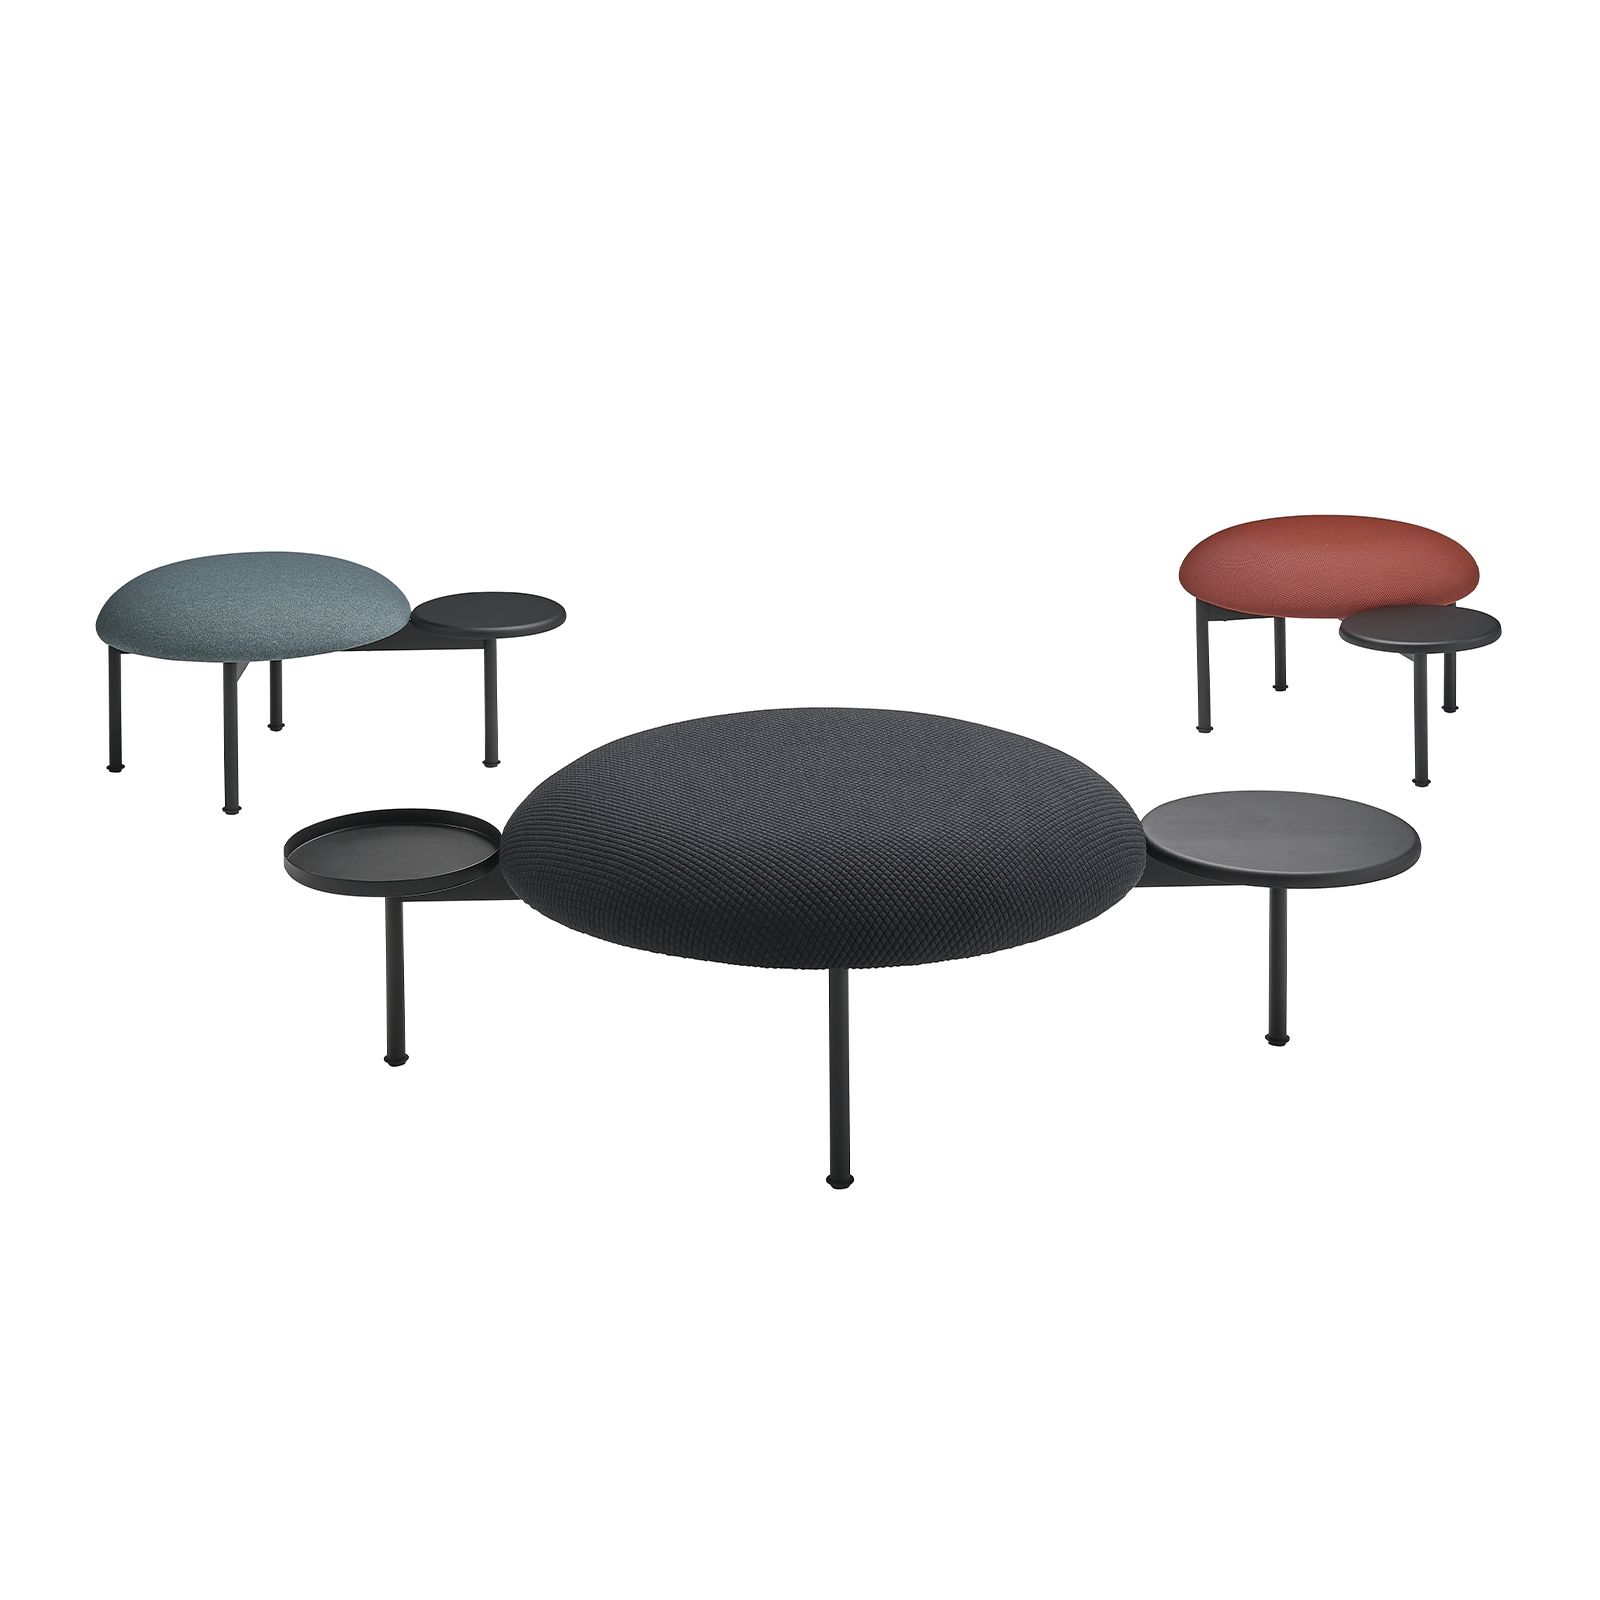 MEETING POINT POUF SYSTEM